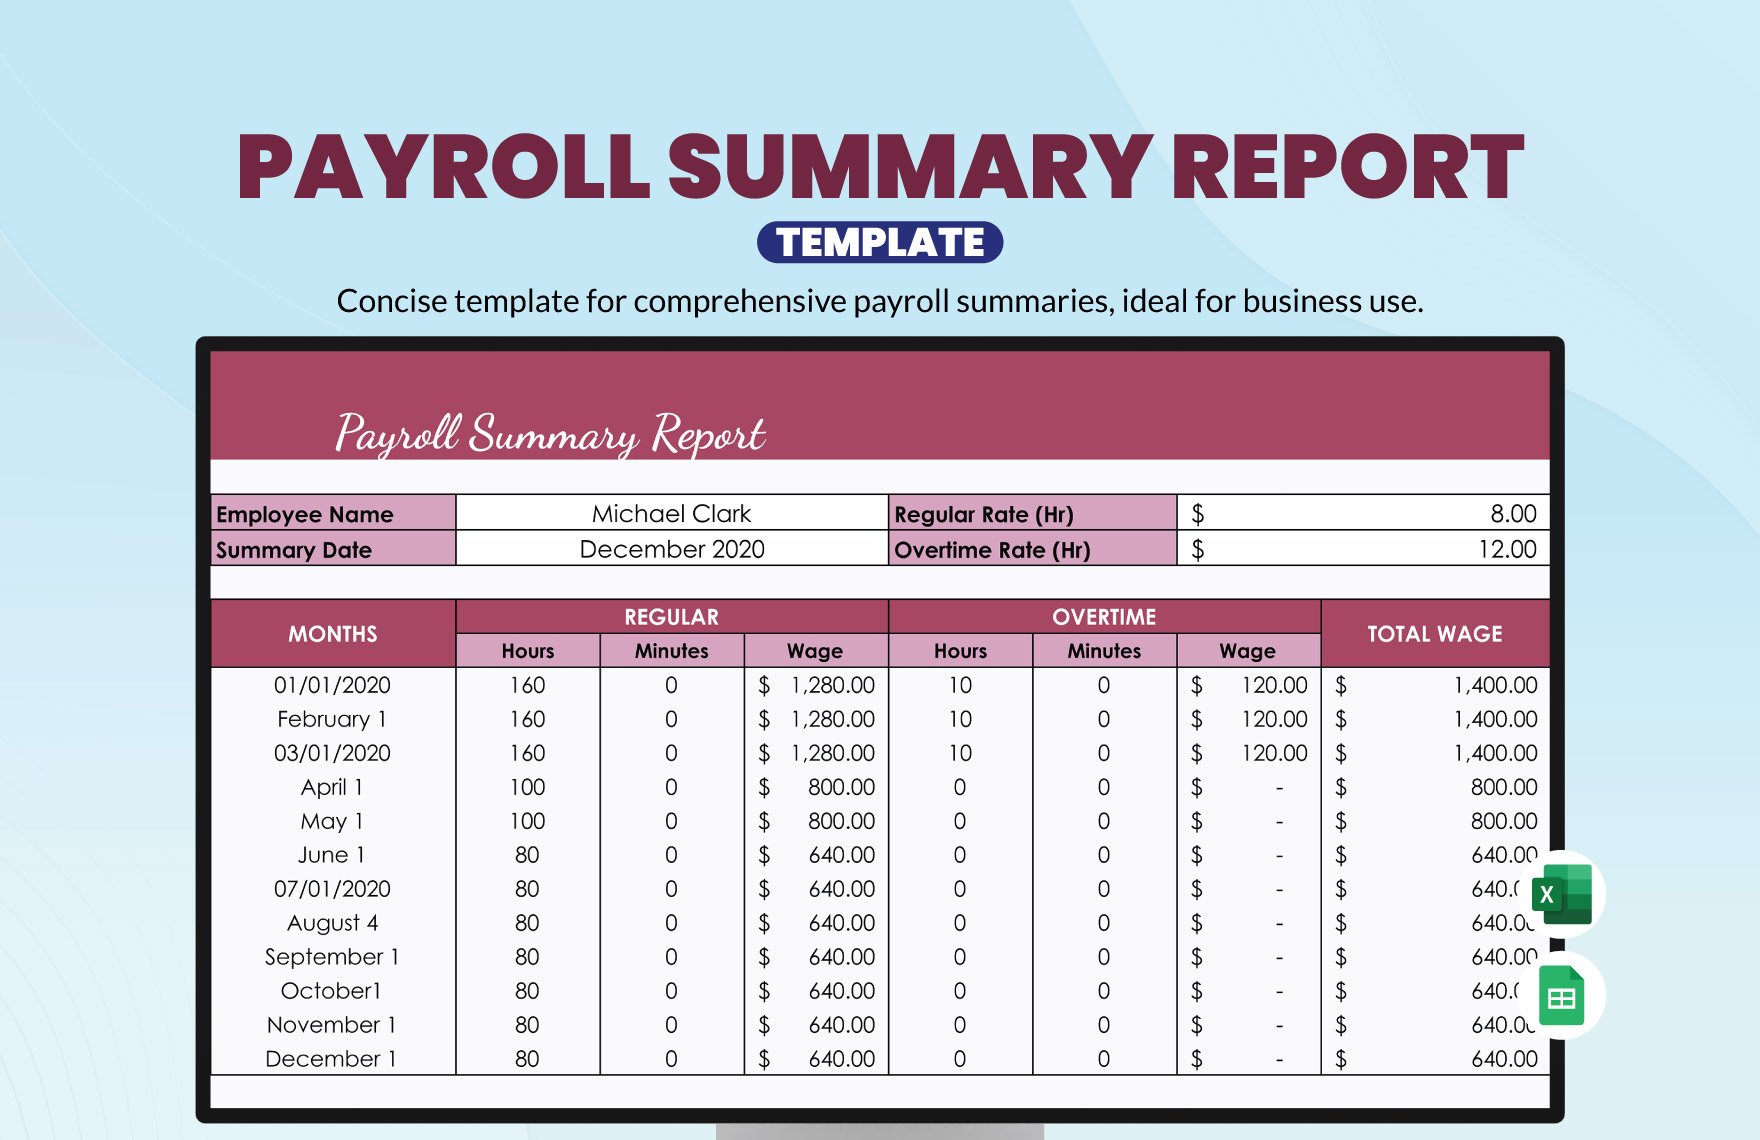 Payroll Summary Report Template in Excel, Google Sheets